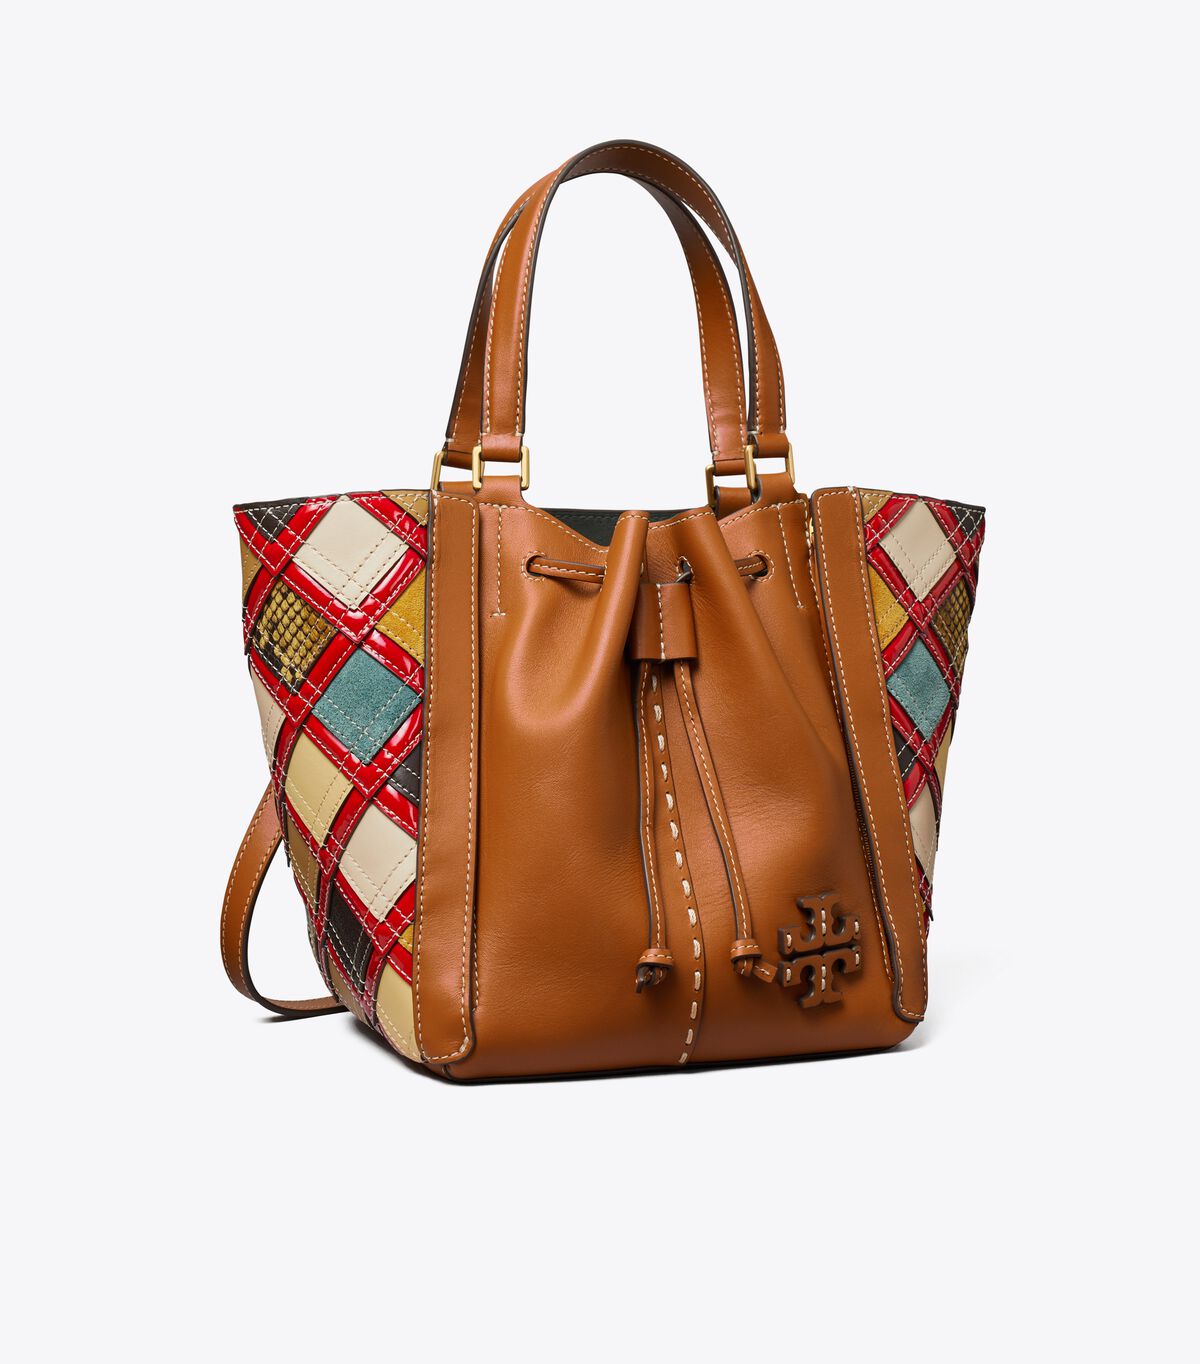 McGraw Patchwork Dragonfly Bag